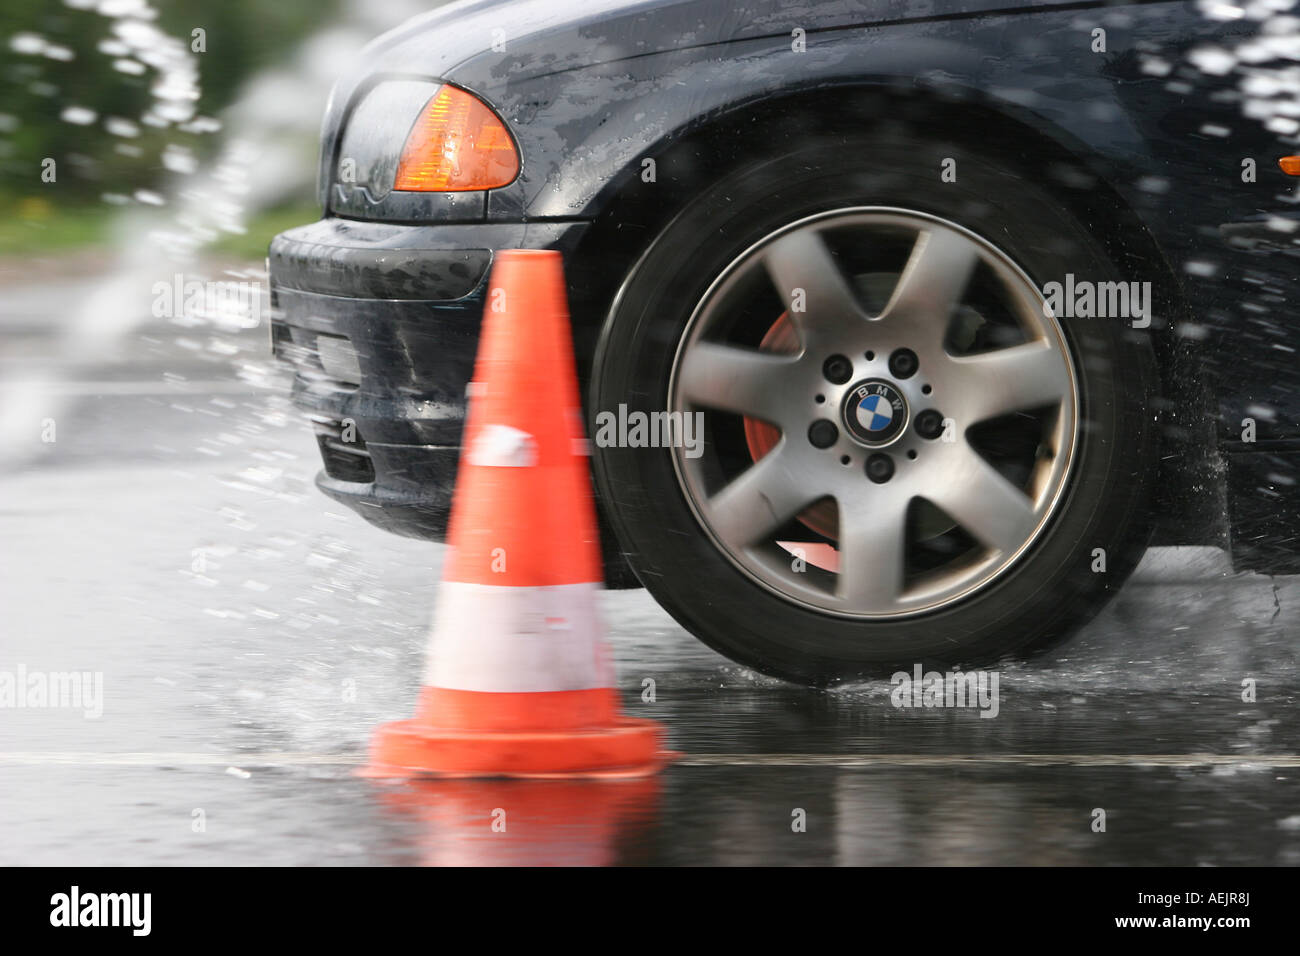 Braking maneuvers during an road safety training with wet conditions Stock Photo